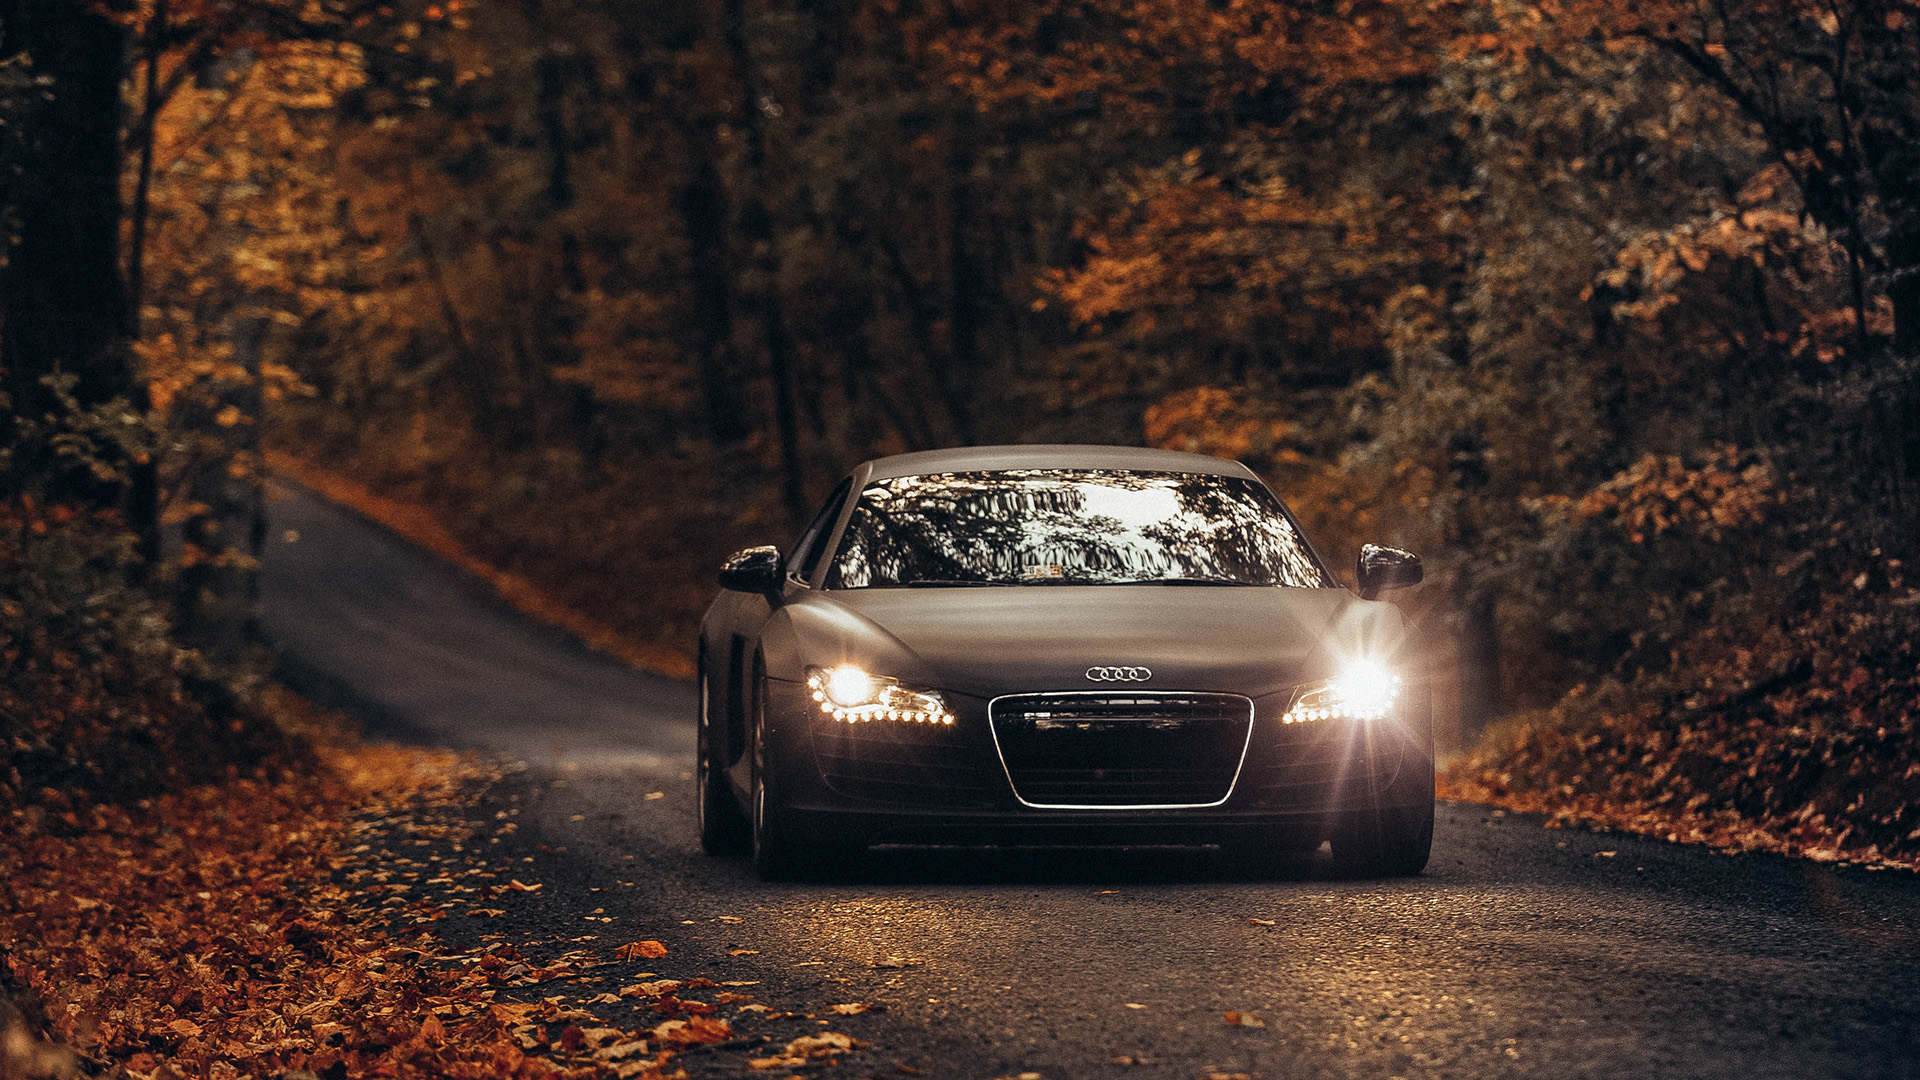 black Audi driving on a backroad